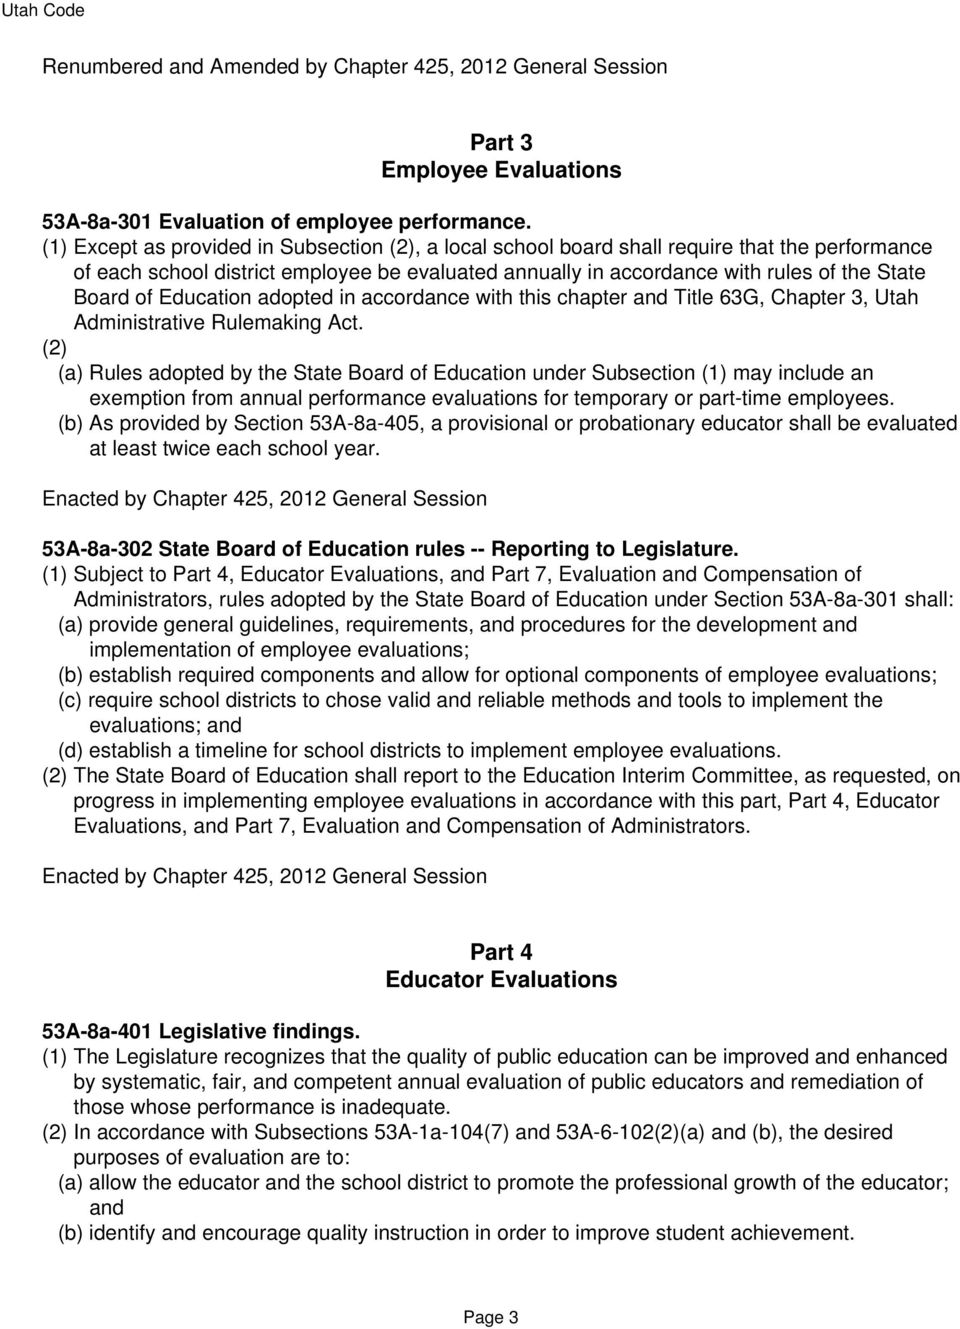 Education adopted in accordance with this chapter and Title 63G, Chapter 3, Utah Administrative Rulemaking Act.